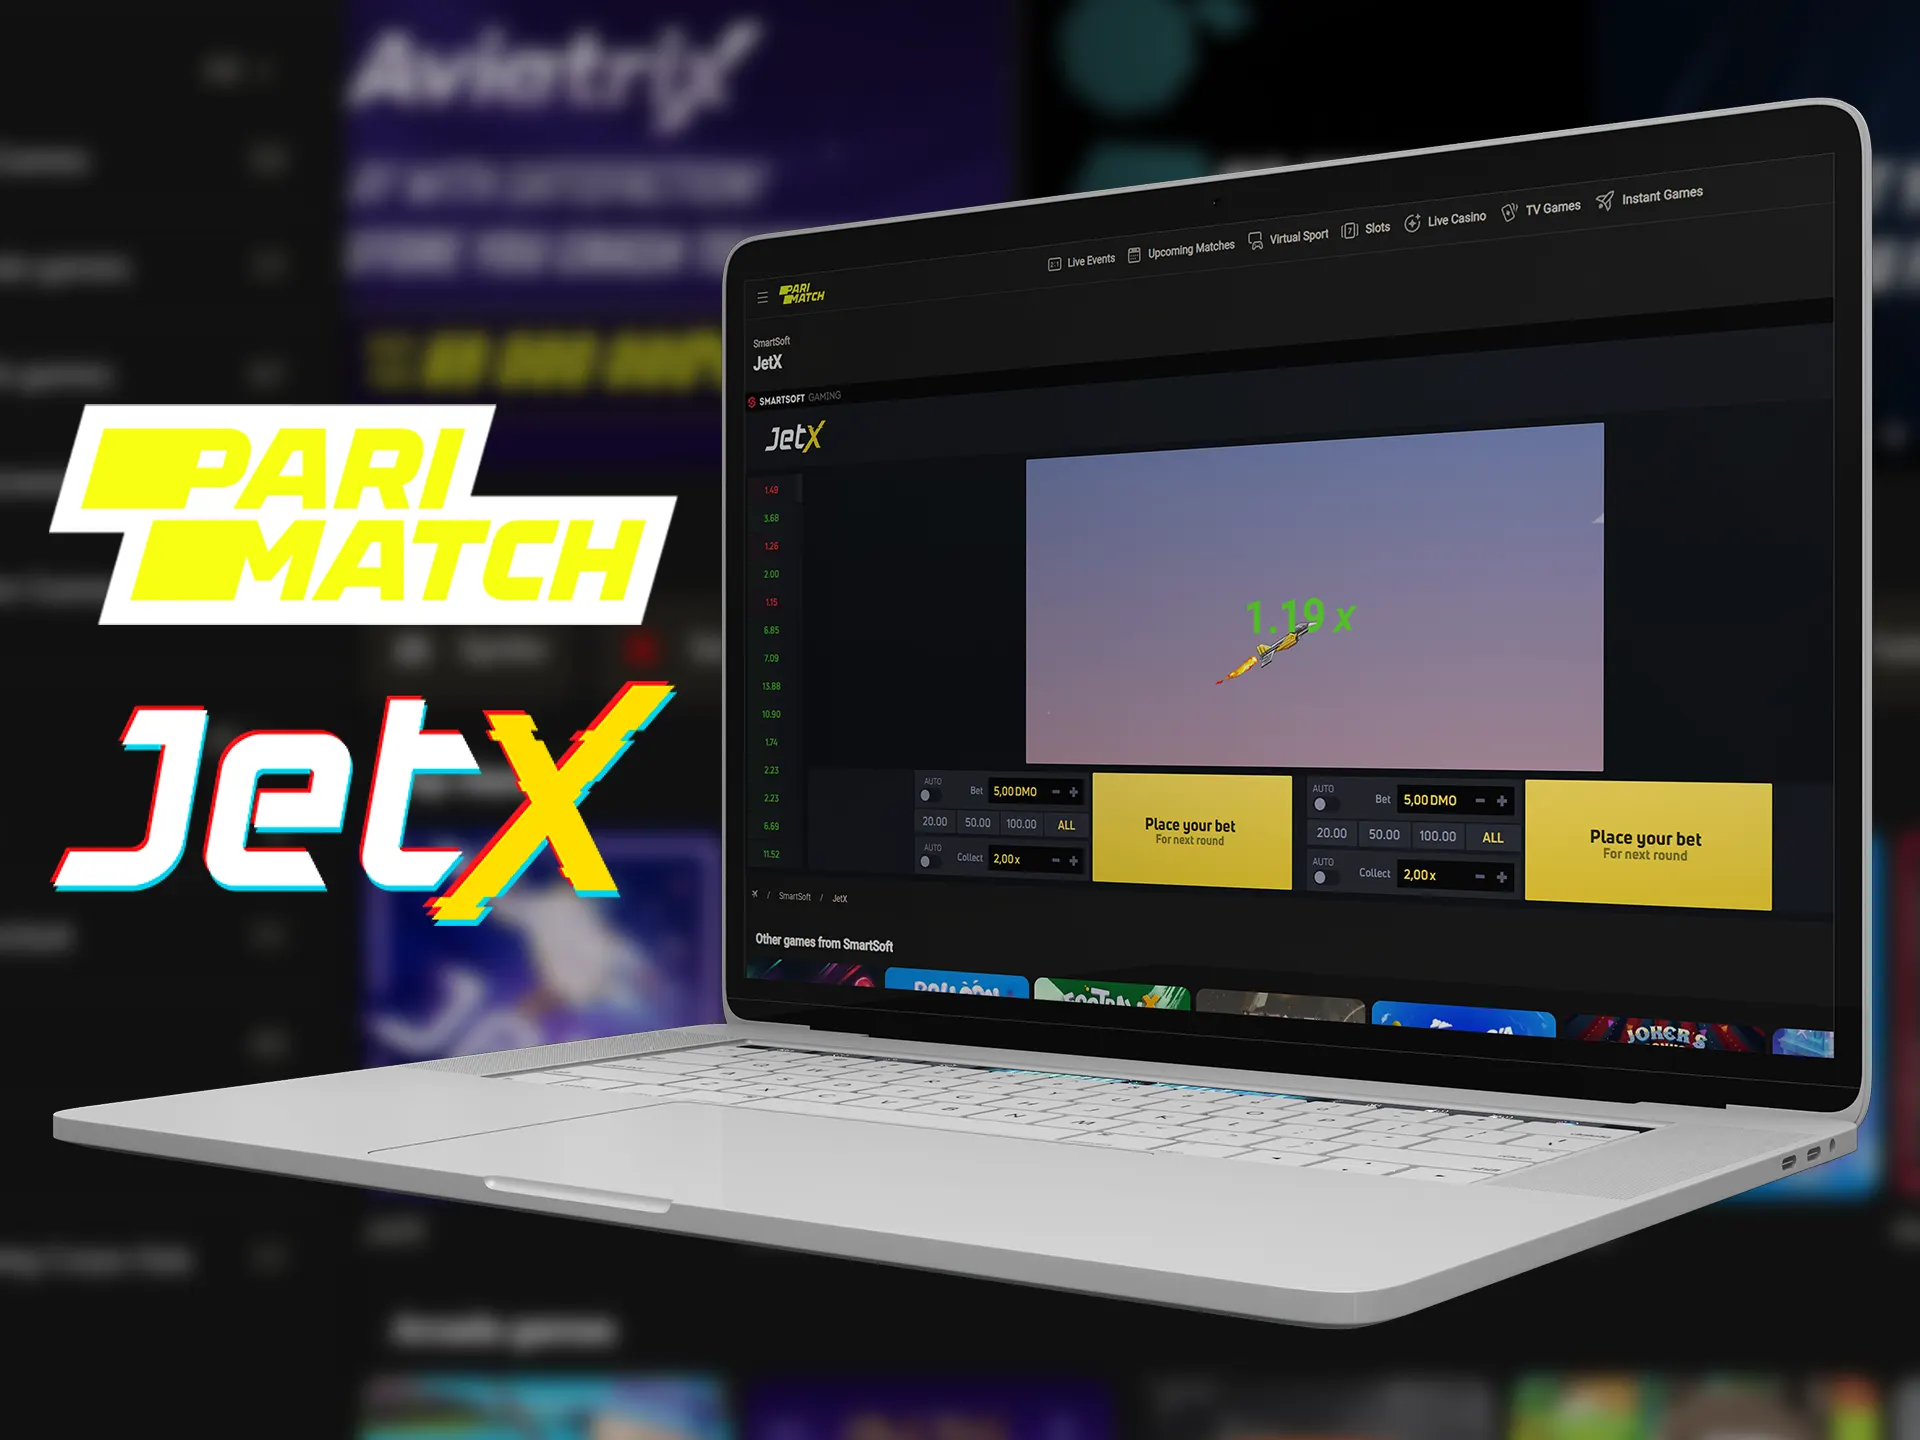 Parimatch is the most popular casino for playing the JetX game.